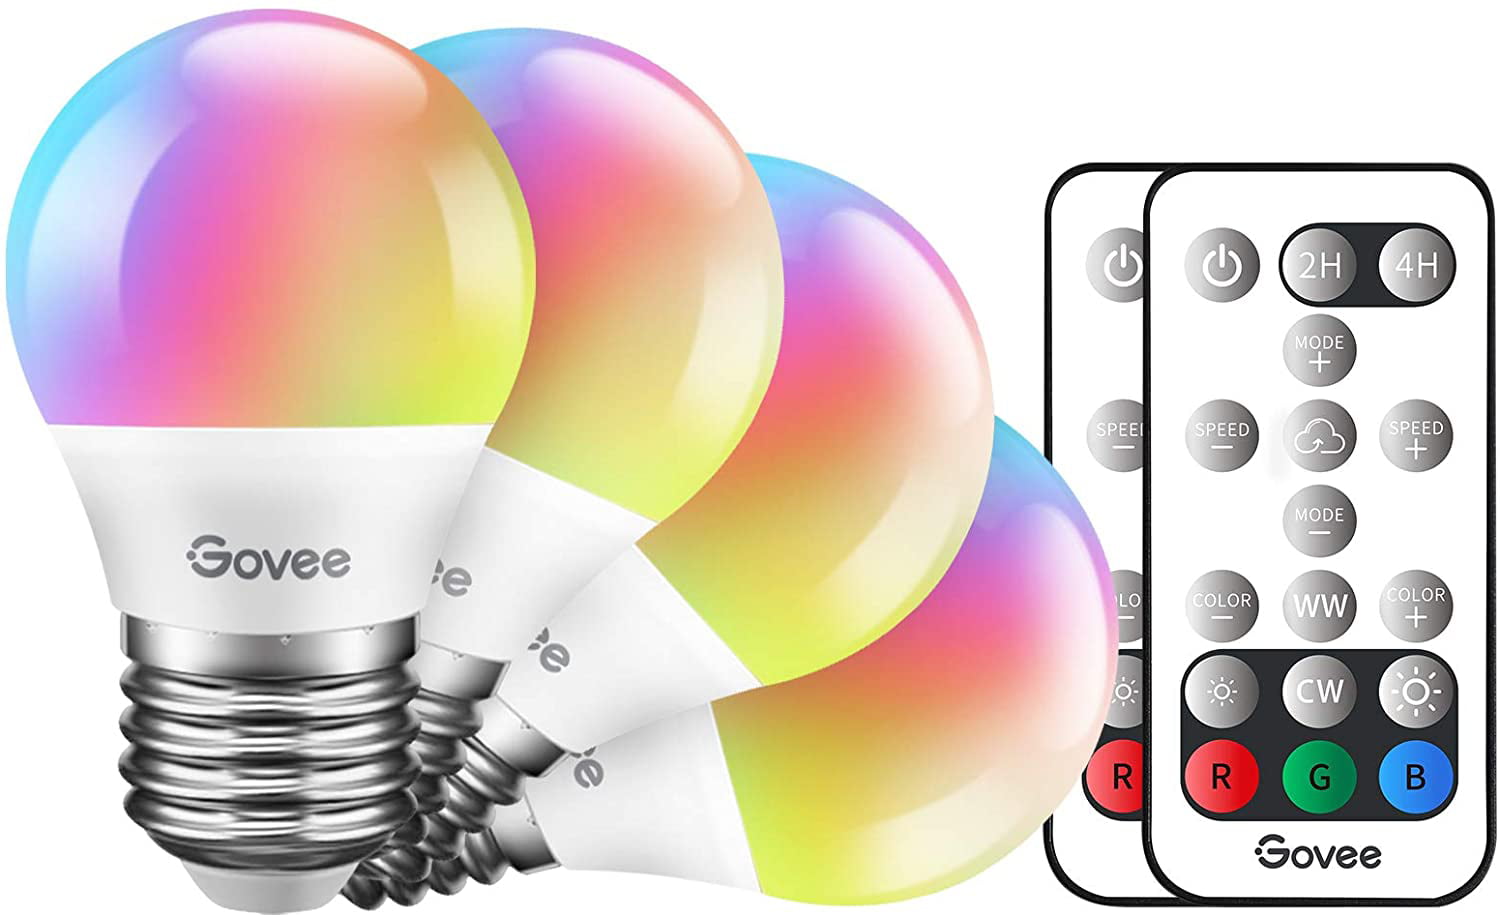 RGB Mood Ambiance Lighting 4 Mode and 16 Color Choice,3PCS Dazlii LED Color Changing Light Bulb with Remote 3W Equivalent 280LM Dimmable Color Spotlight